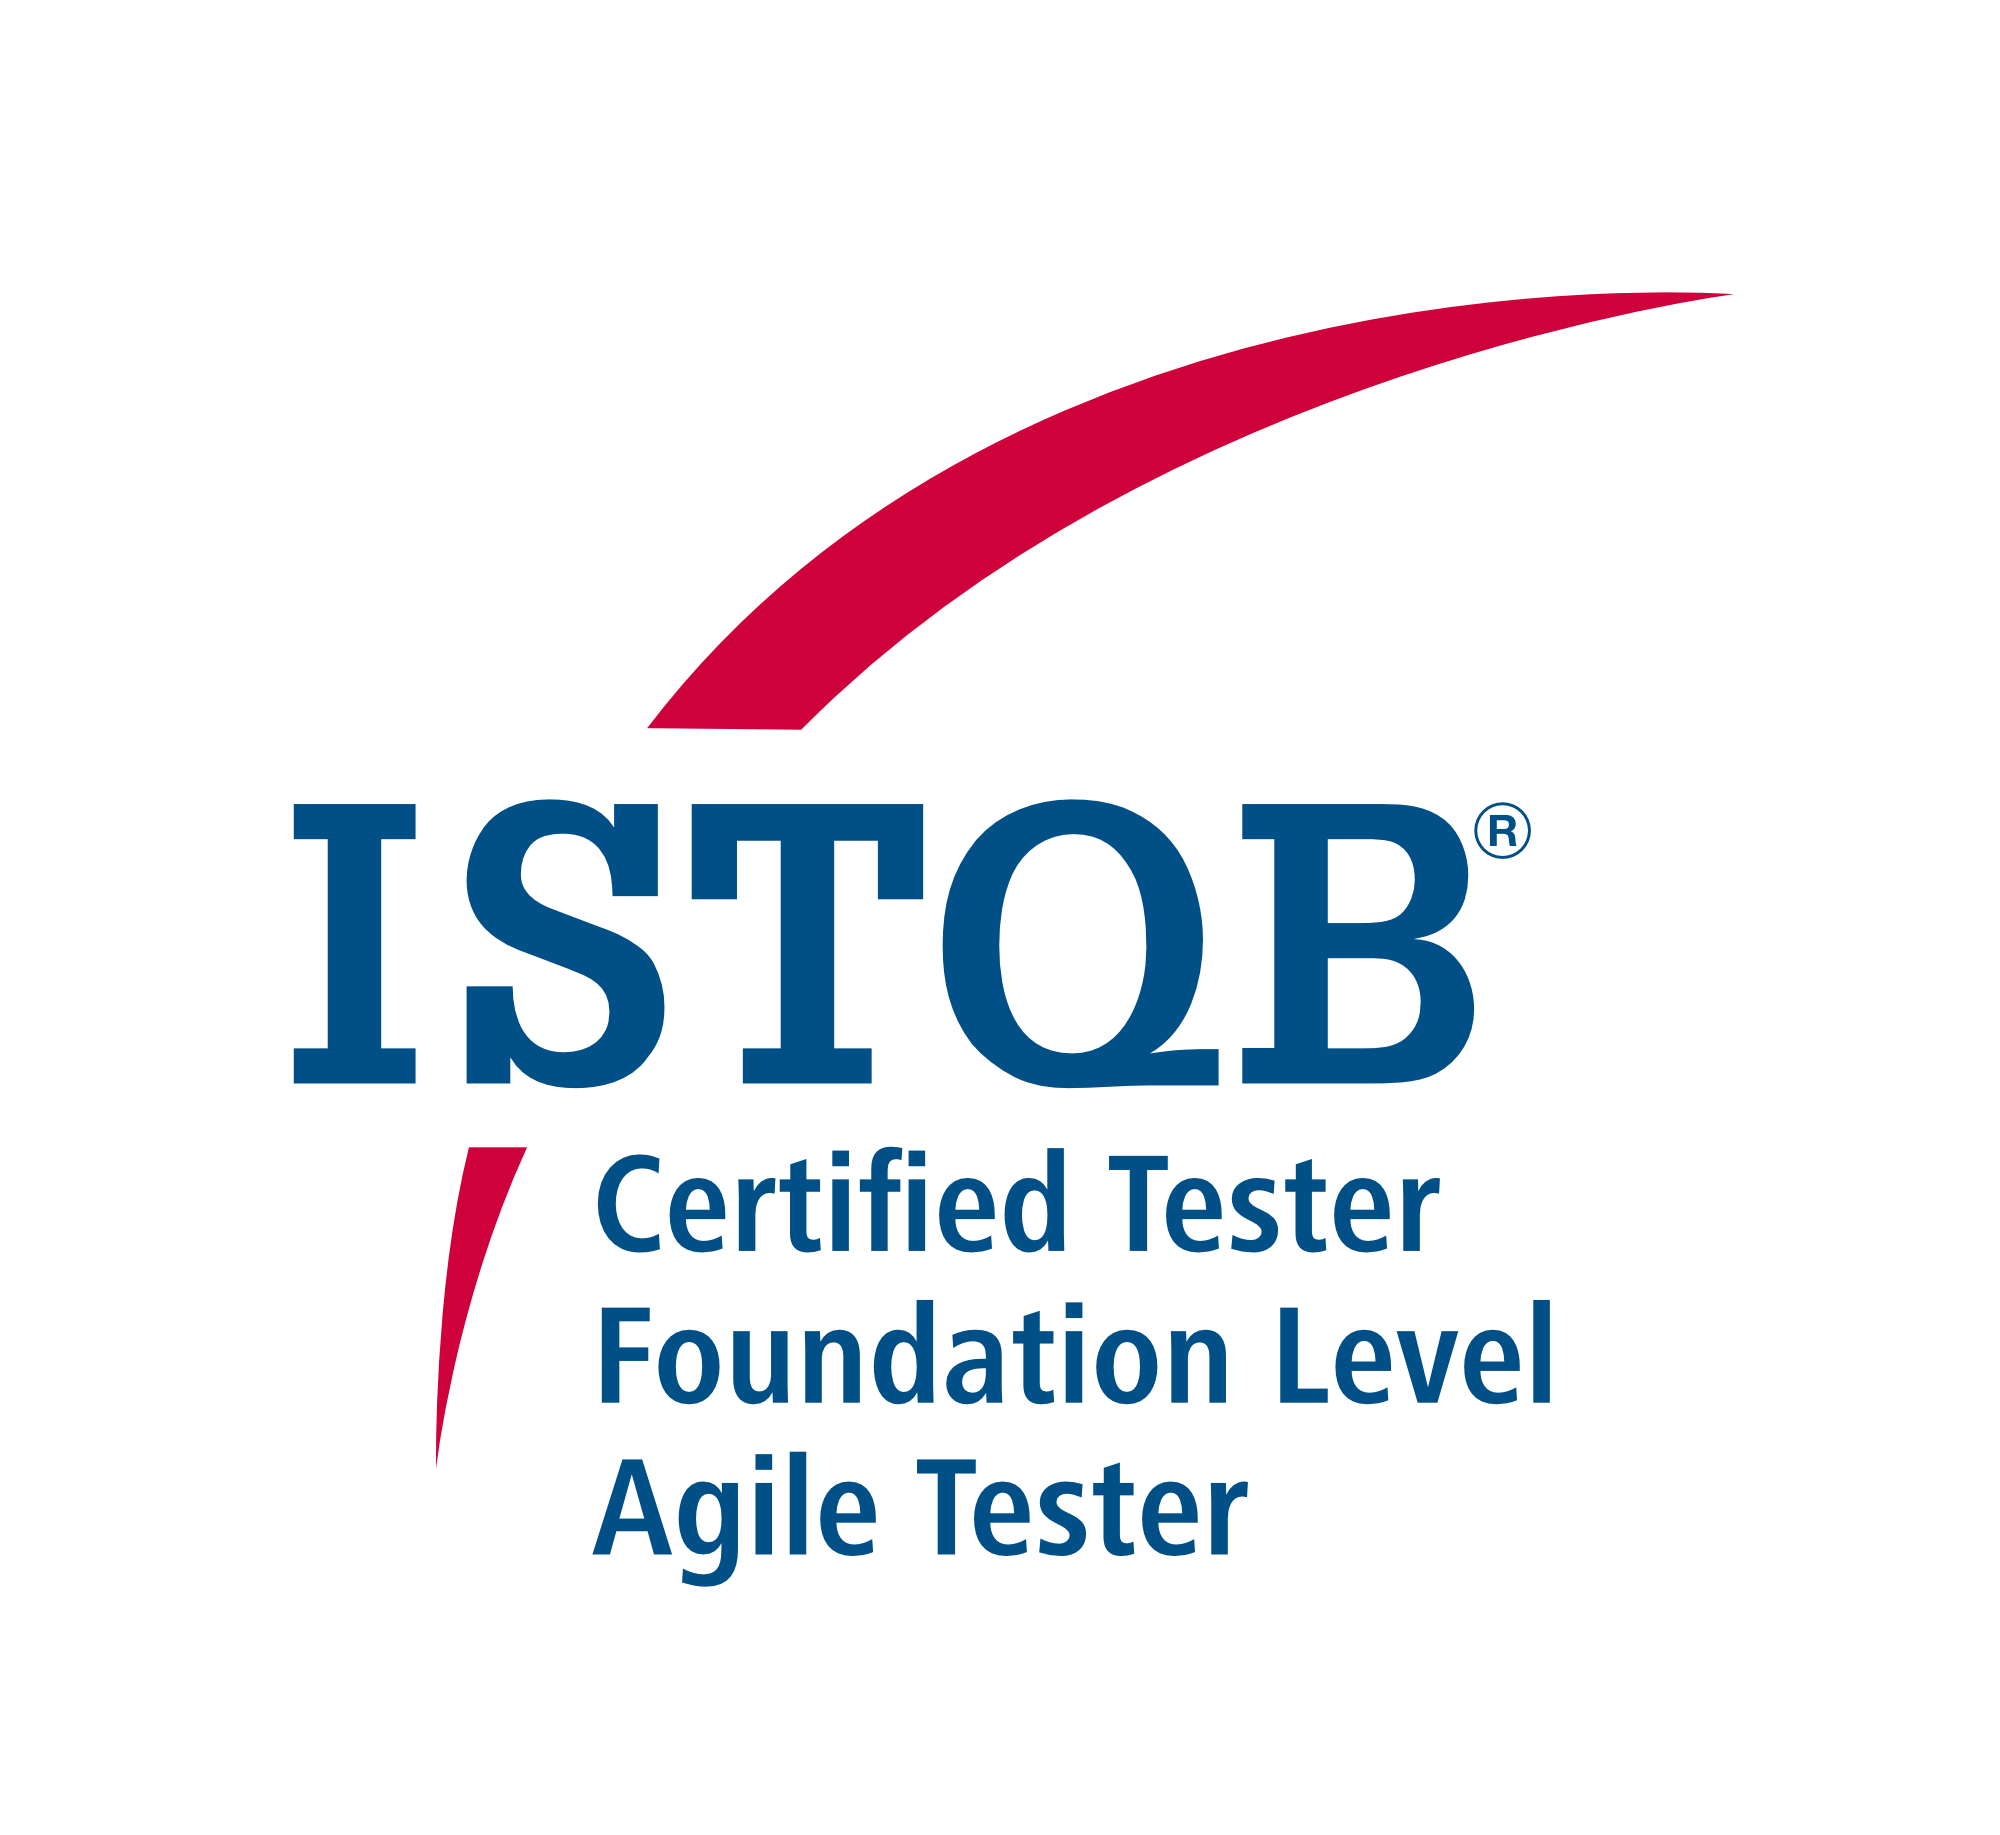 ISTQB Certified Tester (Foundation Level) - Agile Tester (CTFL-AT) badge